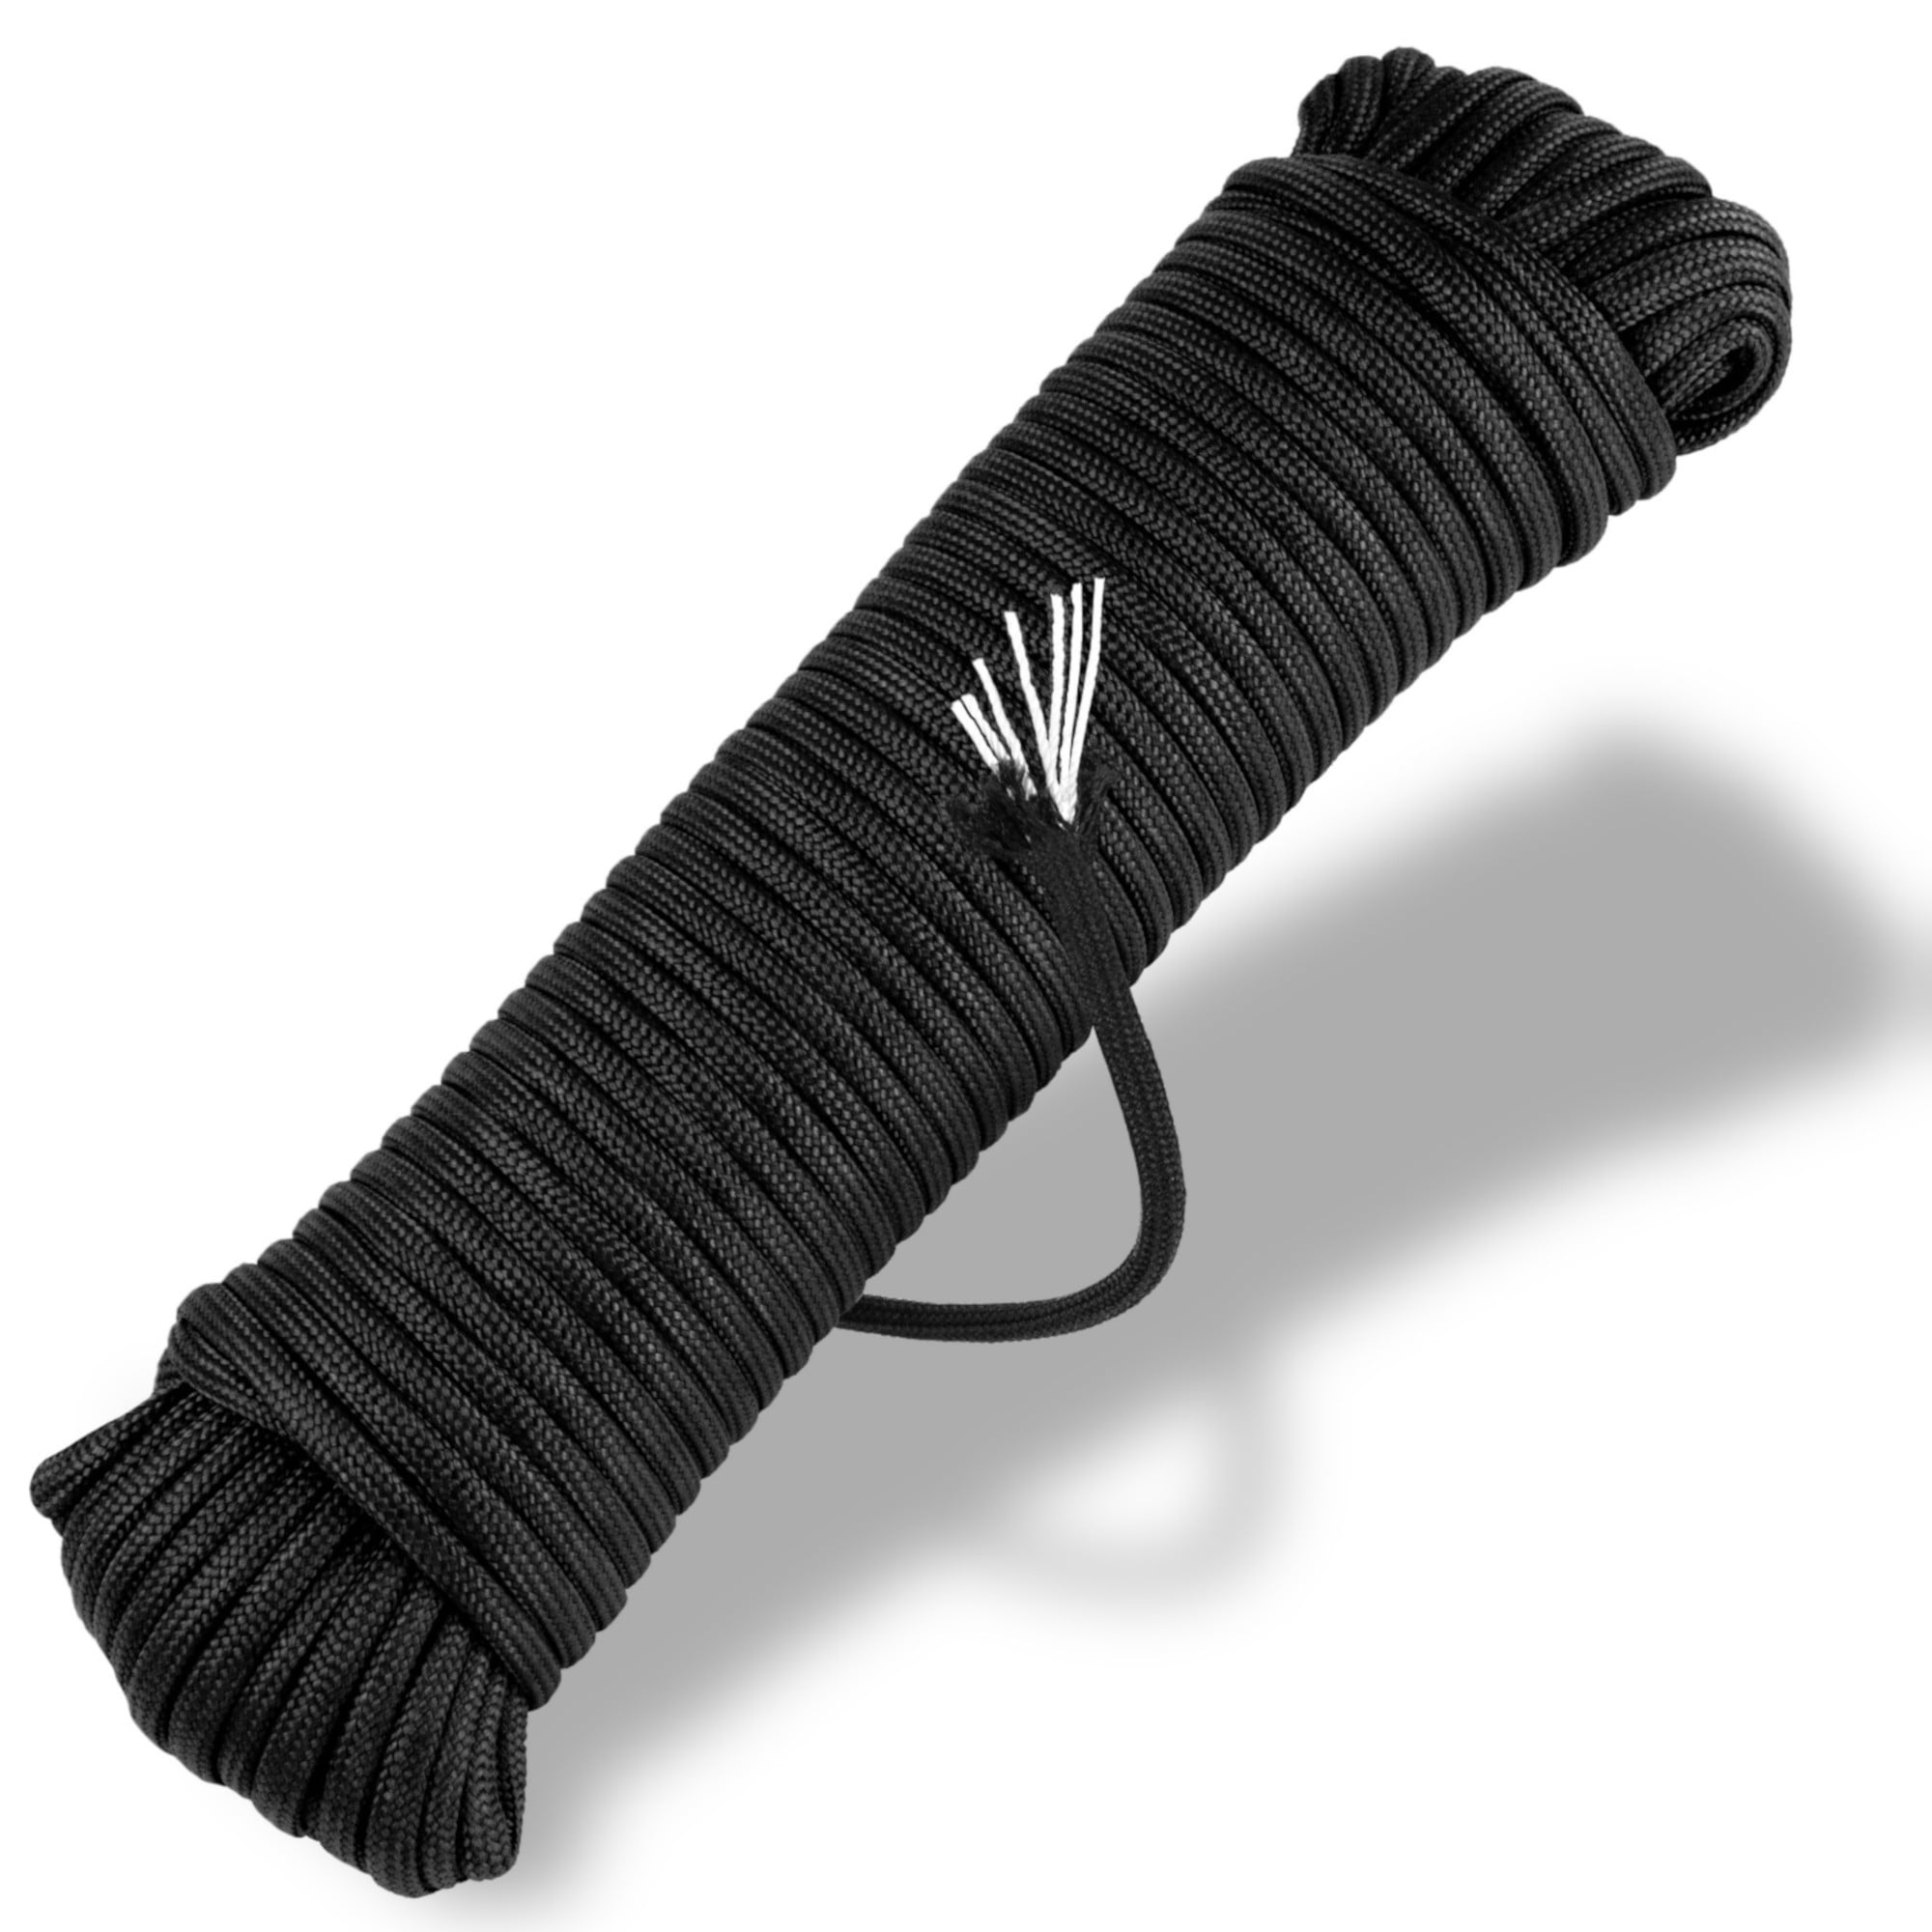 PARACORD PLANET Type III 7 Strand 550 Paracord 